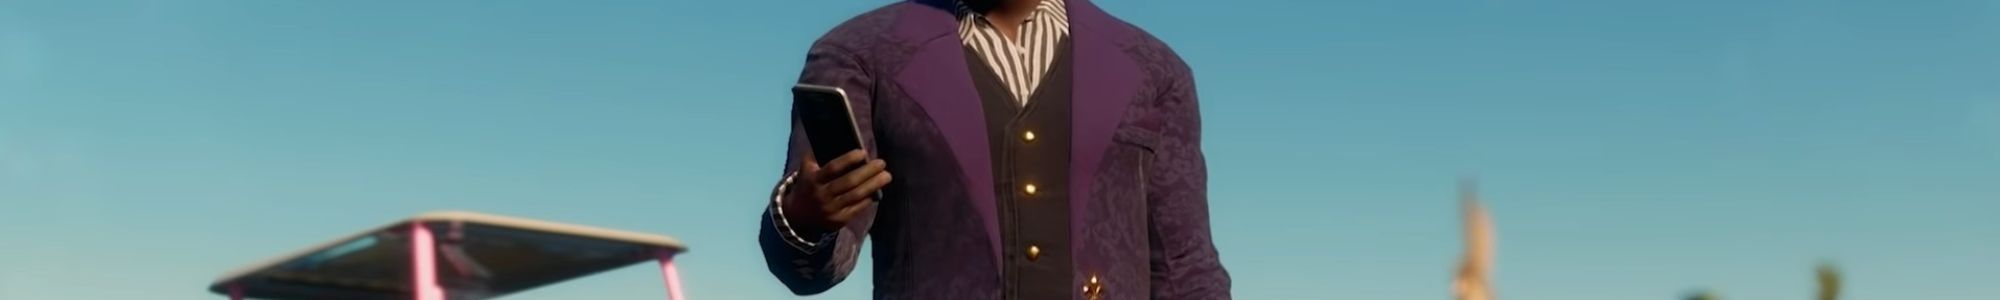 Saints Row Character On Phone In Golf Course Banner